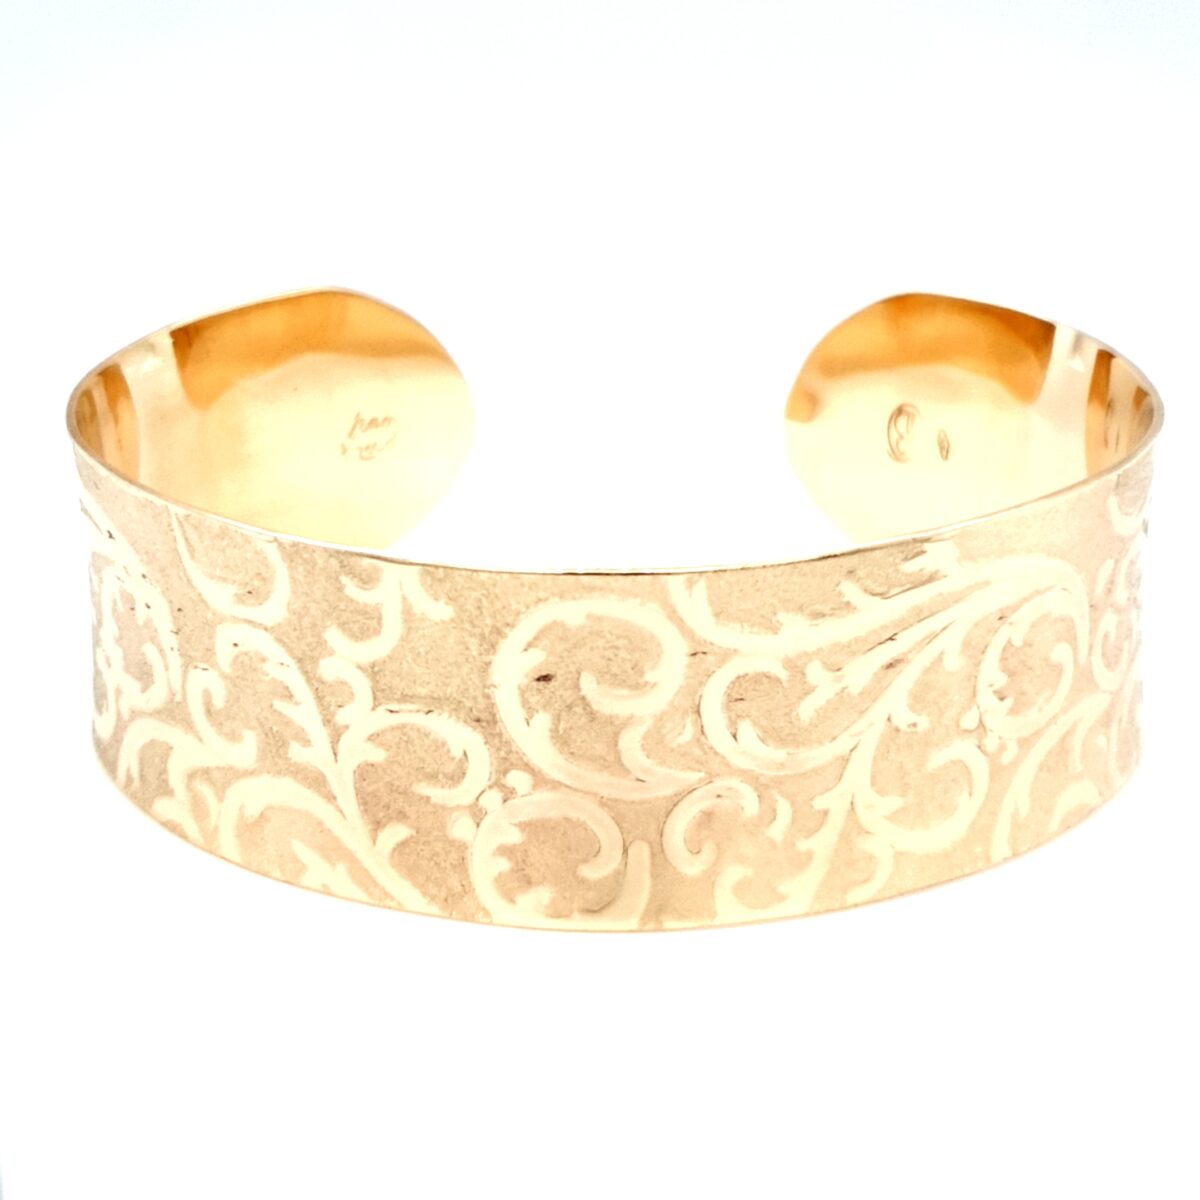 Leon Bakers 9k Yellow Gold Handmade Collectors Cuff_0